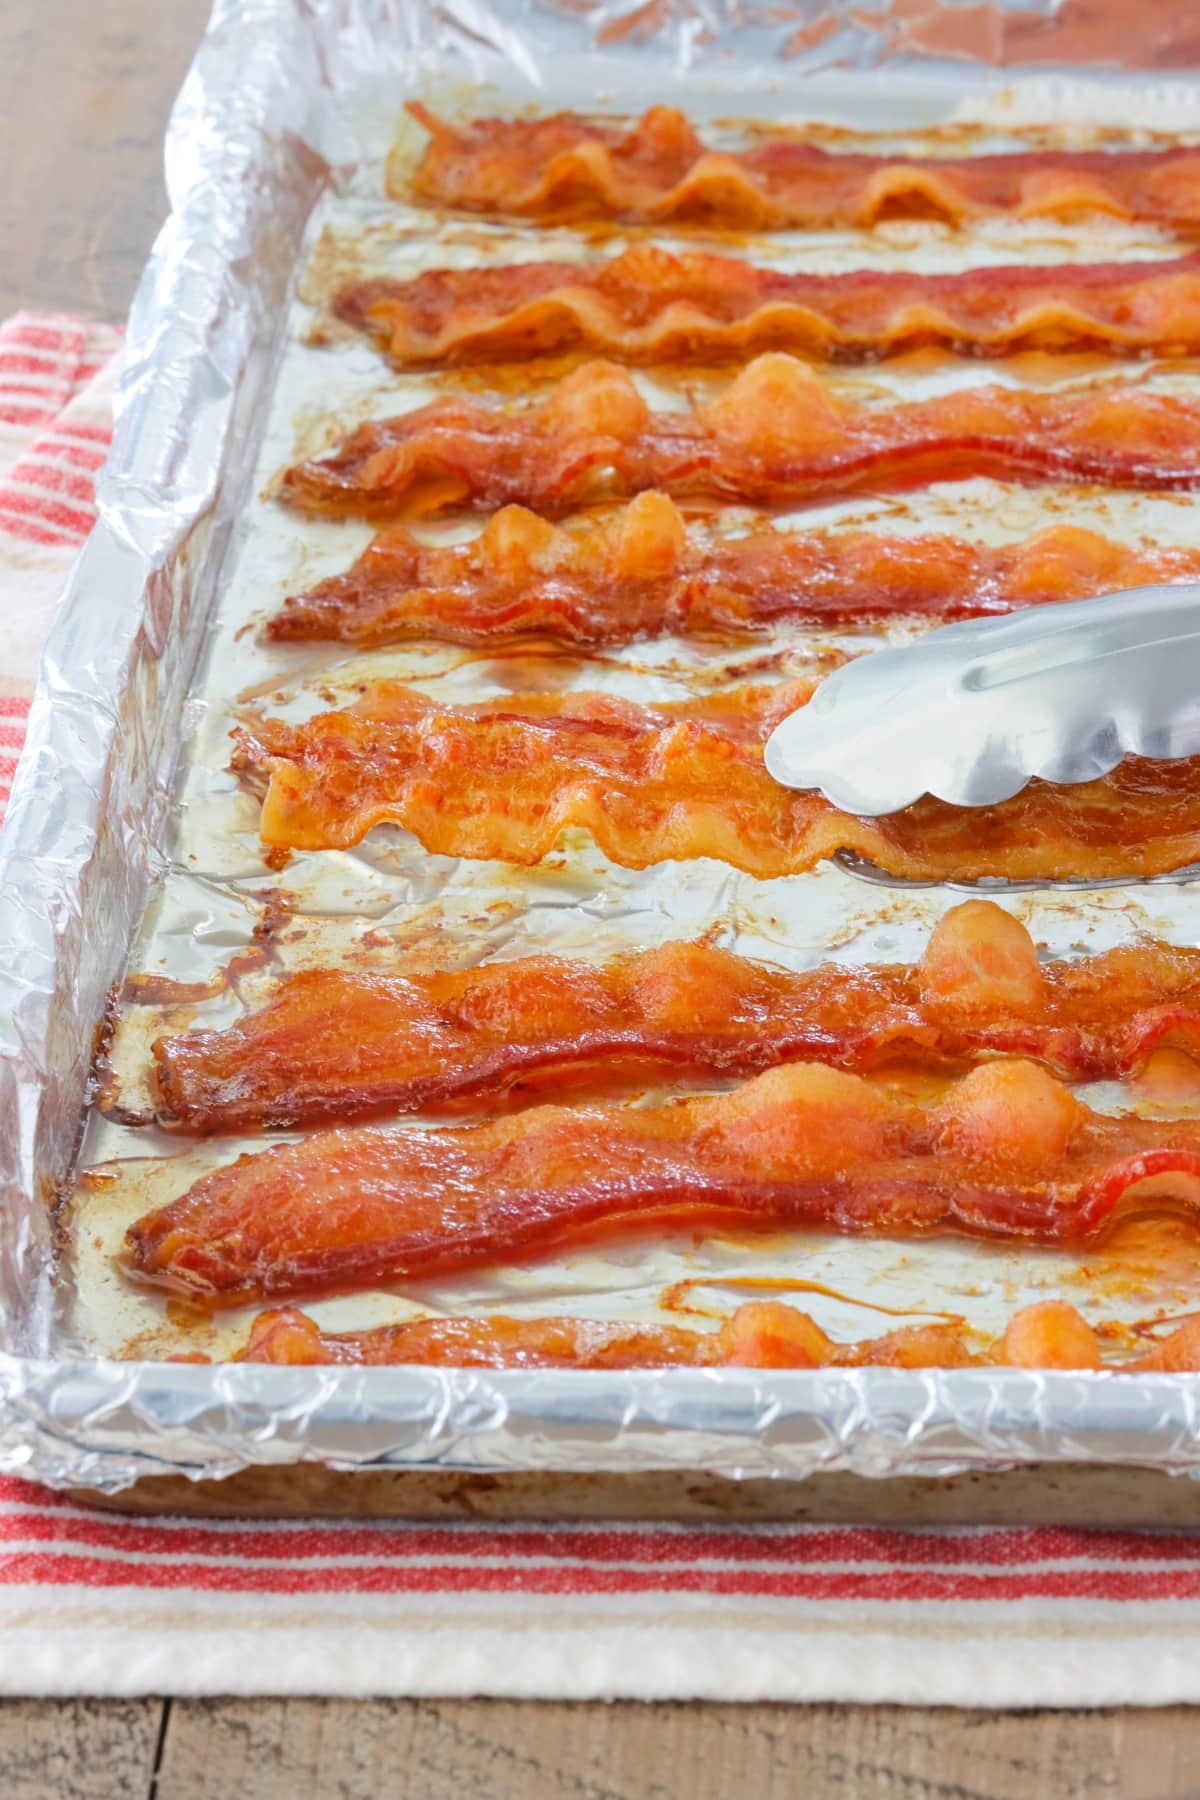 https://www.olgasflavorfactory.com/wp-content/uploads/2021/09/Oven-Baked-Bacon-1.jpg